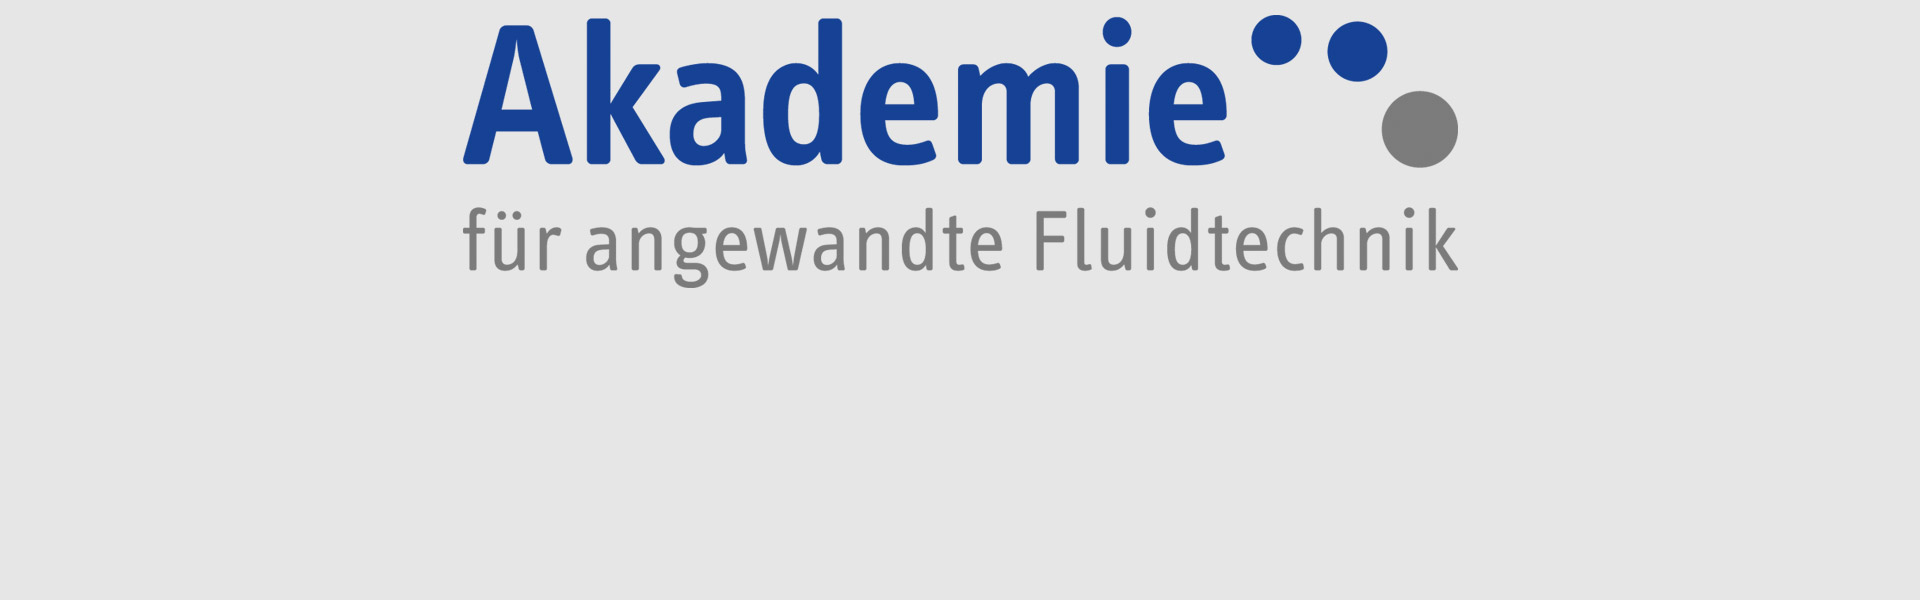 Academy for Applied Fluid Technology GmbH + Co. KG